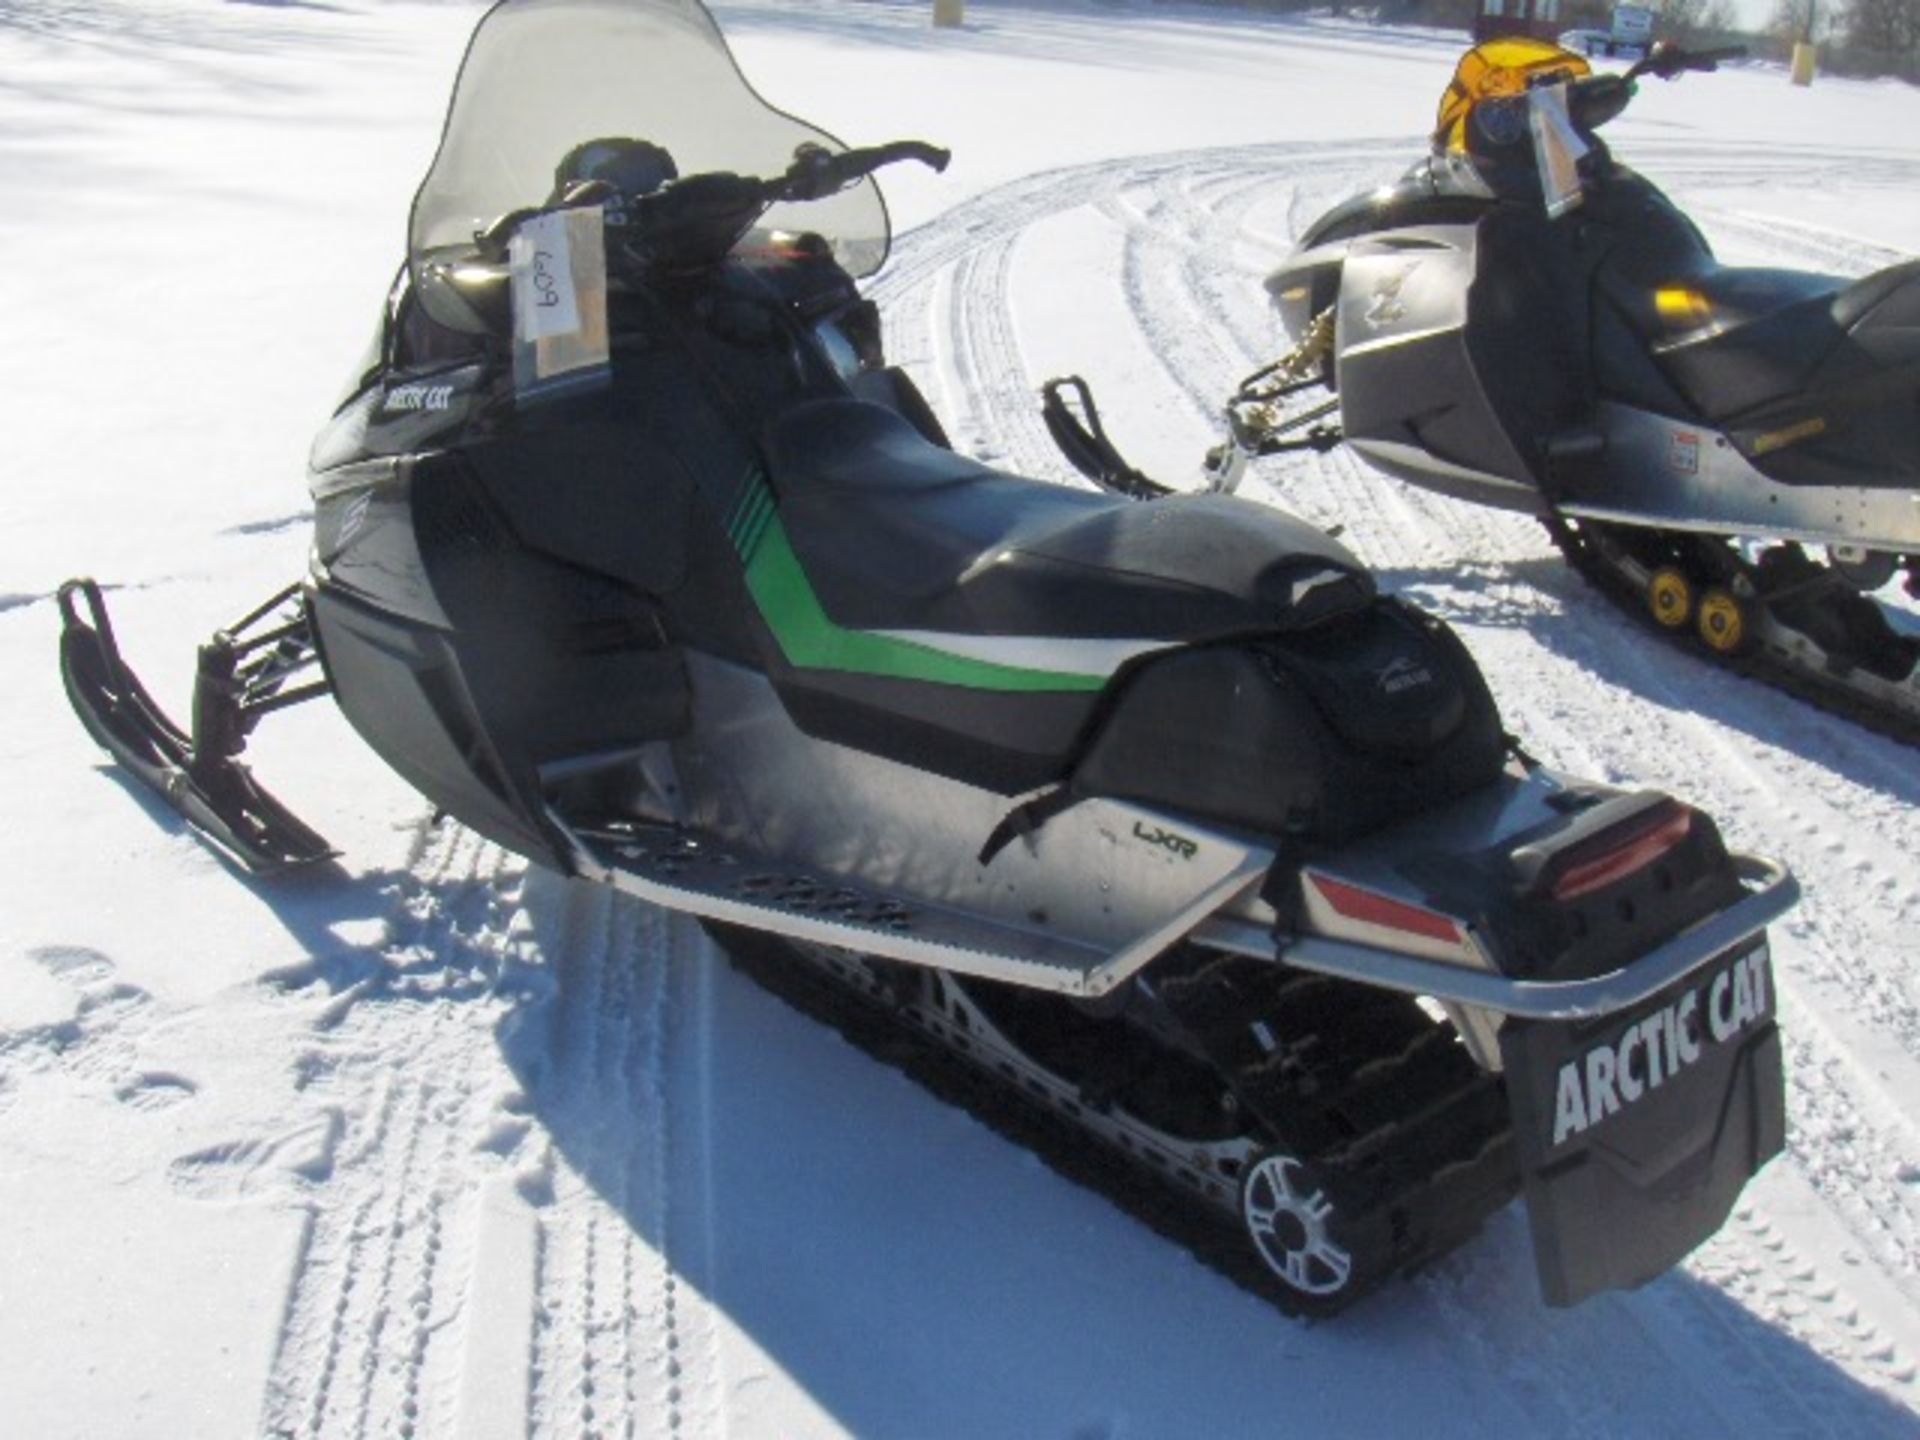 2012 ARCTIC CAQT 500 F5 LXR  4UF12SNWXCT123811 snowmobile, owner started at time of auction check - Image 4 of 4